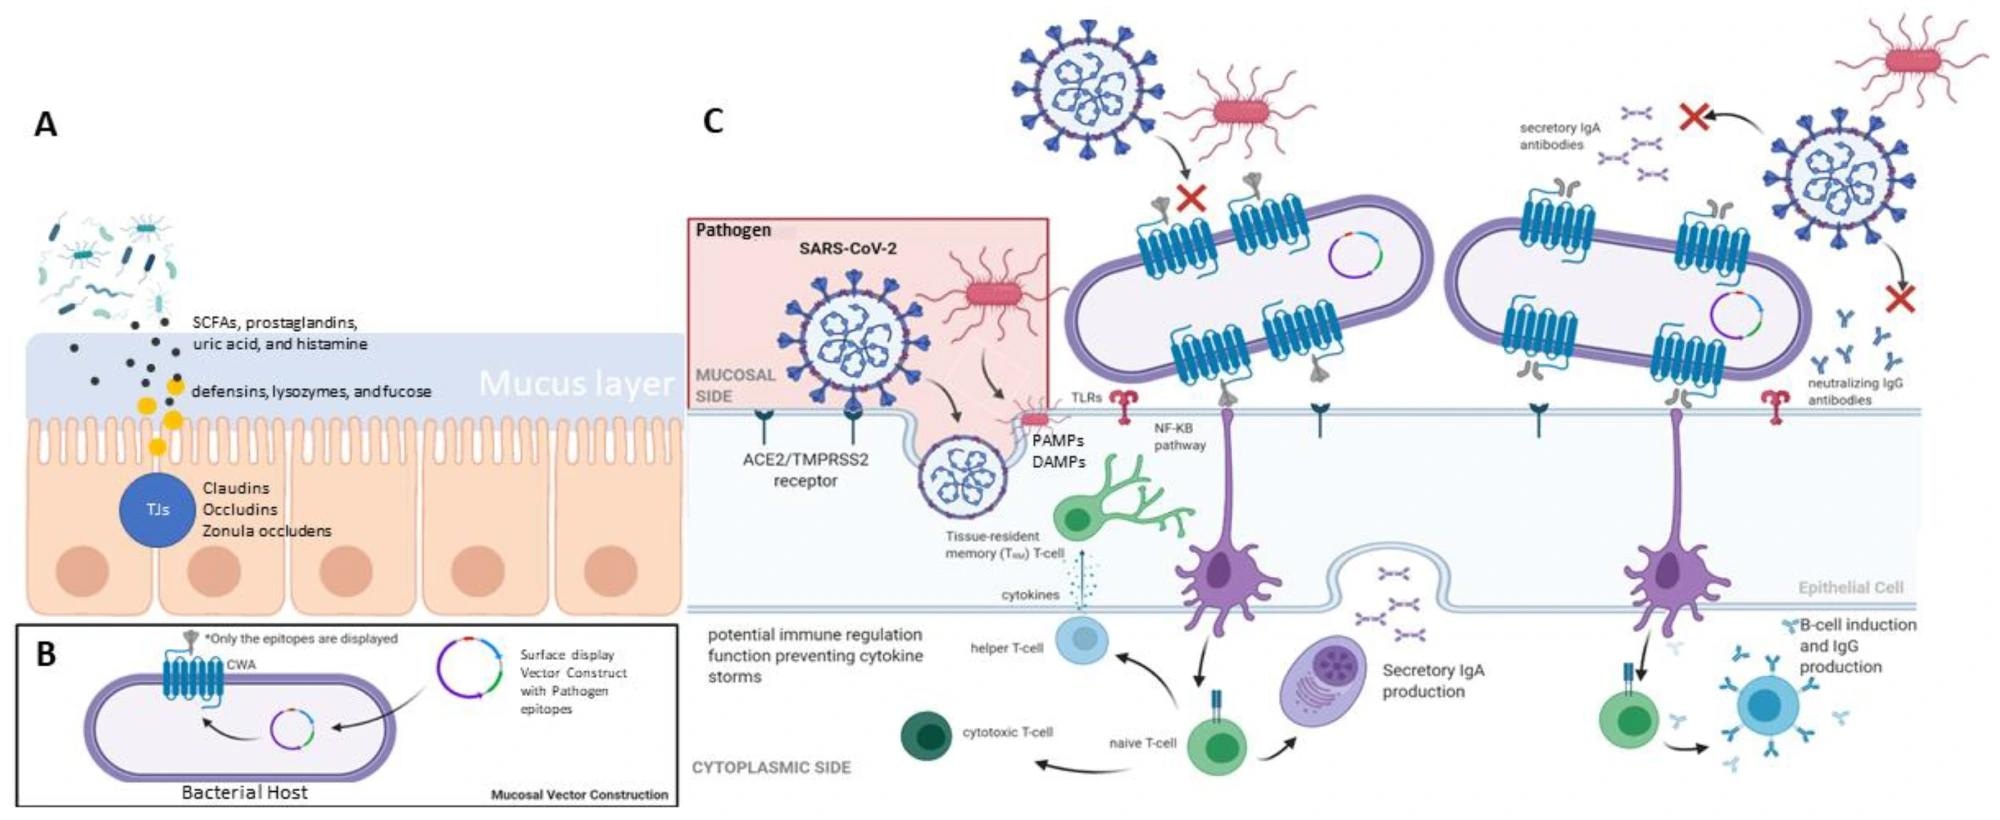 Summary of mucosal-associated immunity in human (A) gut barrier system, (B) mucosal vector construction, and (C) the mucosal response elicited by immune cells.